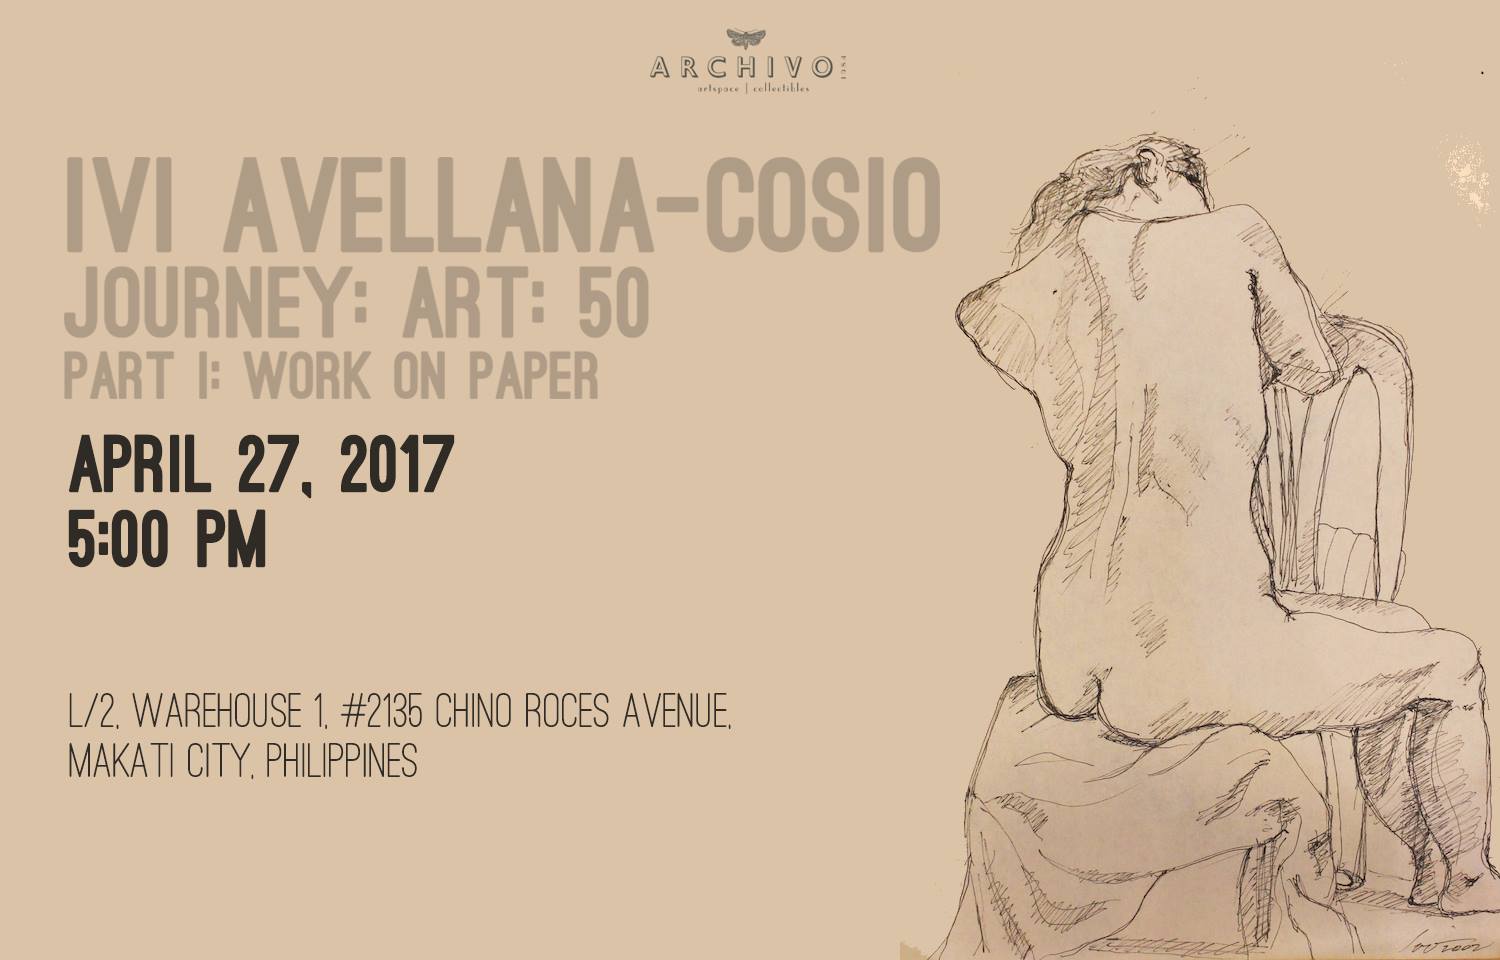 ARCHIVO 1984 Page Liked · April 26 · See you tomorrow at the opening reception of Ivi Avellana-Cosio's "Journey: Art: 50, Part I: Work On Paper". Doors open at 5 PM! We are located at Level 2, Warehouse 1, #2135 Chino Roces Avenue, Makati City . . . ARCHIVO 1984 Gallery is proud to present Ivi Avellana-Cosio in Journey: Art: 50, Part 1: Work on Paper opening on Thursday, April 27, 2017. Exhibiting professionally since 1967, Ivi Avellana-Cosio celebrates 50 years in the art world with a show at Archivo 1984 Gallery featuring works on paper throughout her career. The painter, printmaker and photographer who received an education from the University of Santo Tomas and Philippine Women's University has exhibited in over 200 shows both locally and abroad, earning several awards and recognitions such as the Araw ng Maynila Patnubay ng Sining at Kalinangan Award for Painting and was most recently listed by the International Biographical Society in Cambrdige, England in its "Top 100 Professionals of 2012". In Journey: Art: 50, Part 1: Work on Paper, Archivo 1984 showcases the artist's work across media such as print, watercolor, pastel and photography, ranging from her signature ethnic-inspired prints to photos from her travels, displayed alongside nudes in ink and pastel collected over the past five decades. Exhibit runs until May 18, 2017.